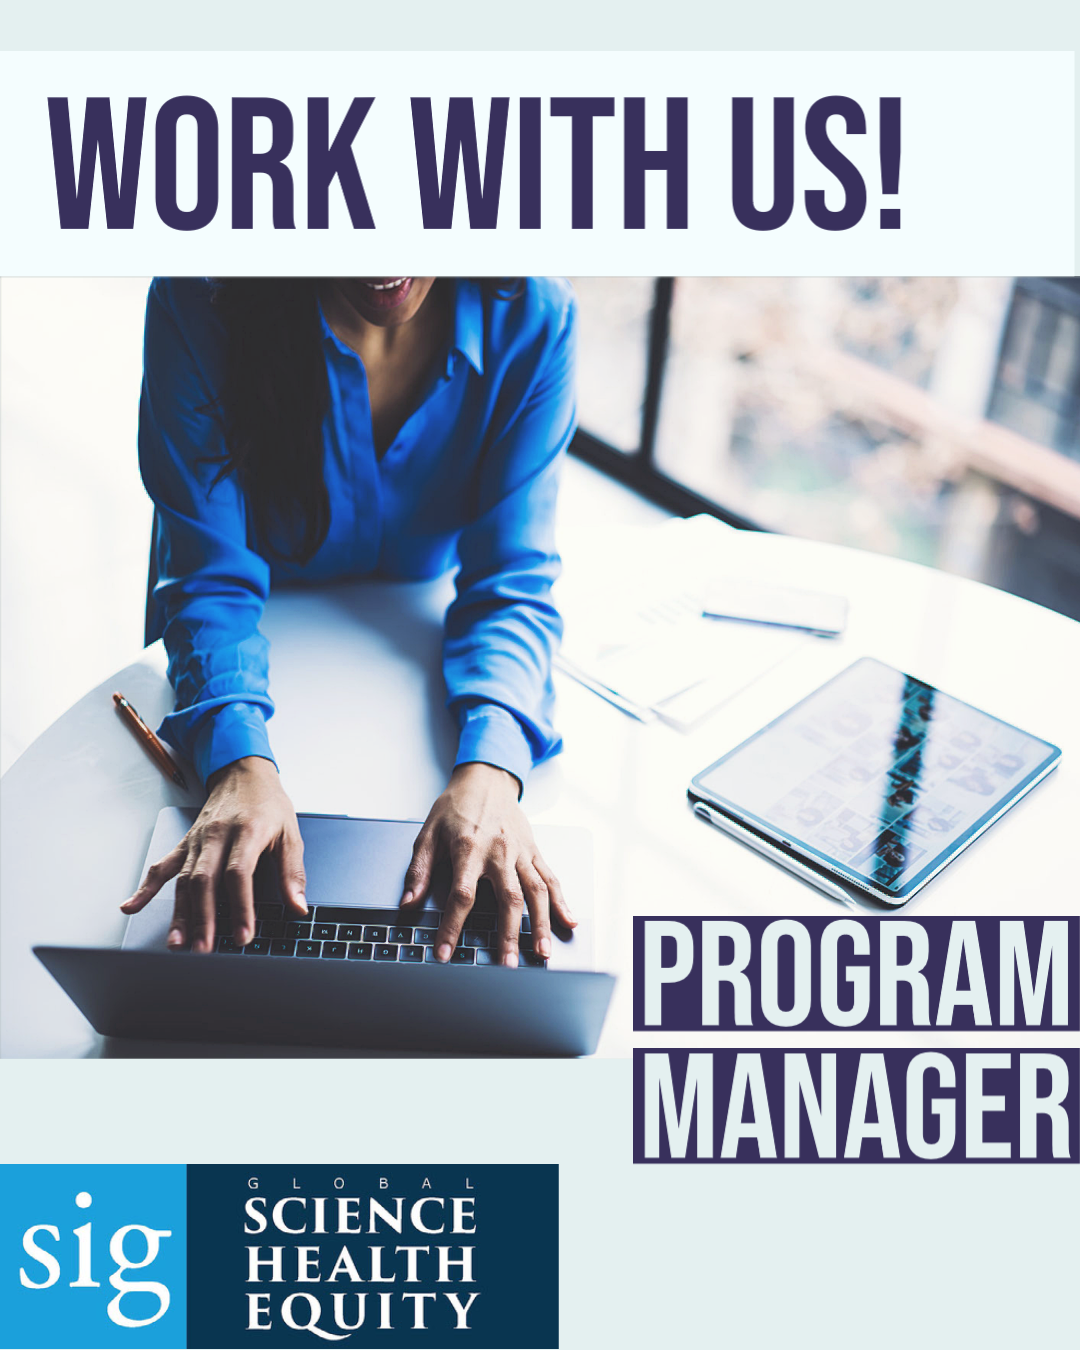 Work with us! Program Manager